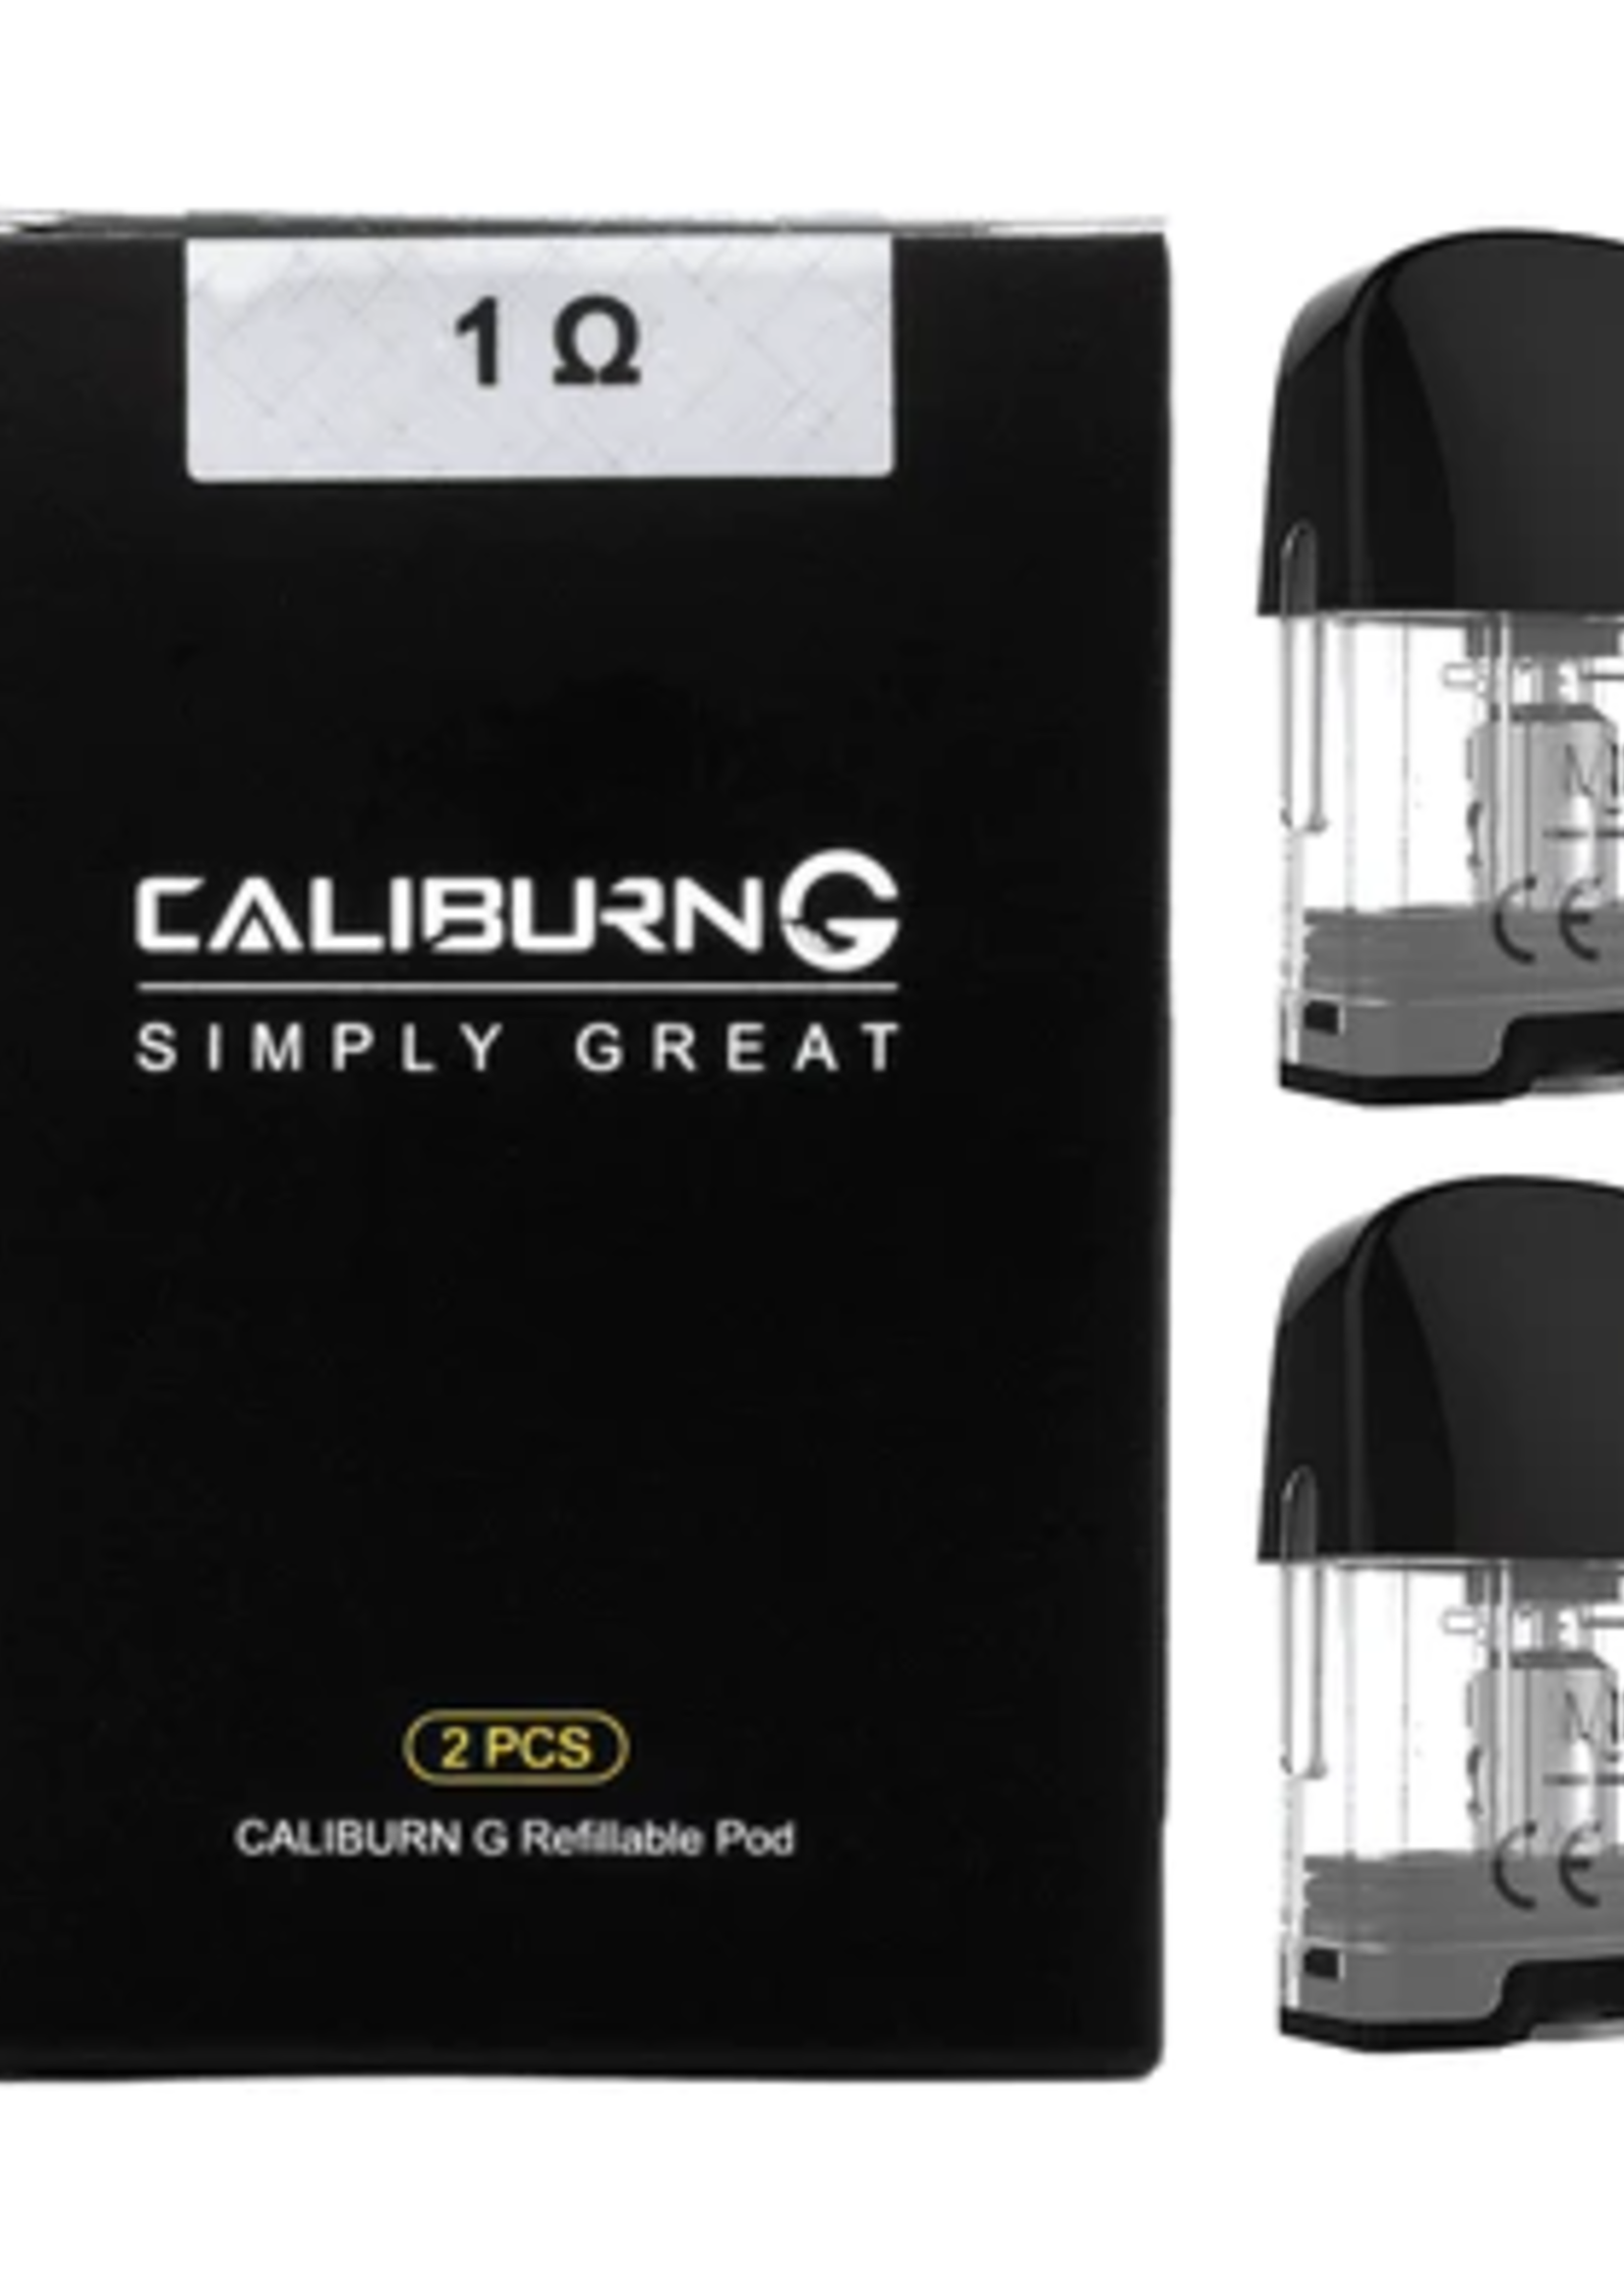 Uwell Caliburn G Replacement Pod & Coil 1.0ohm 2pk